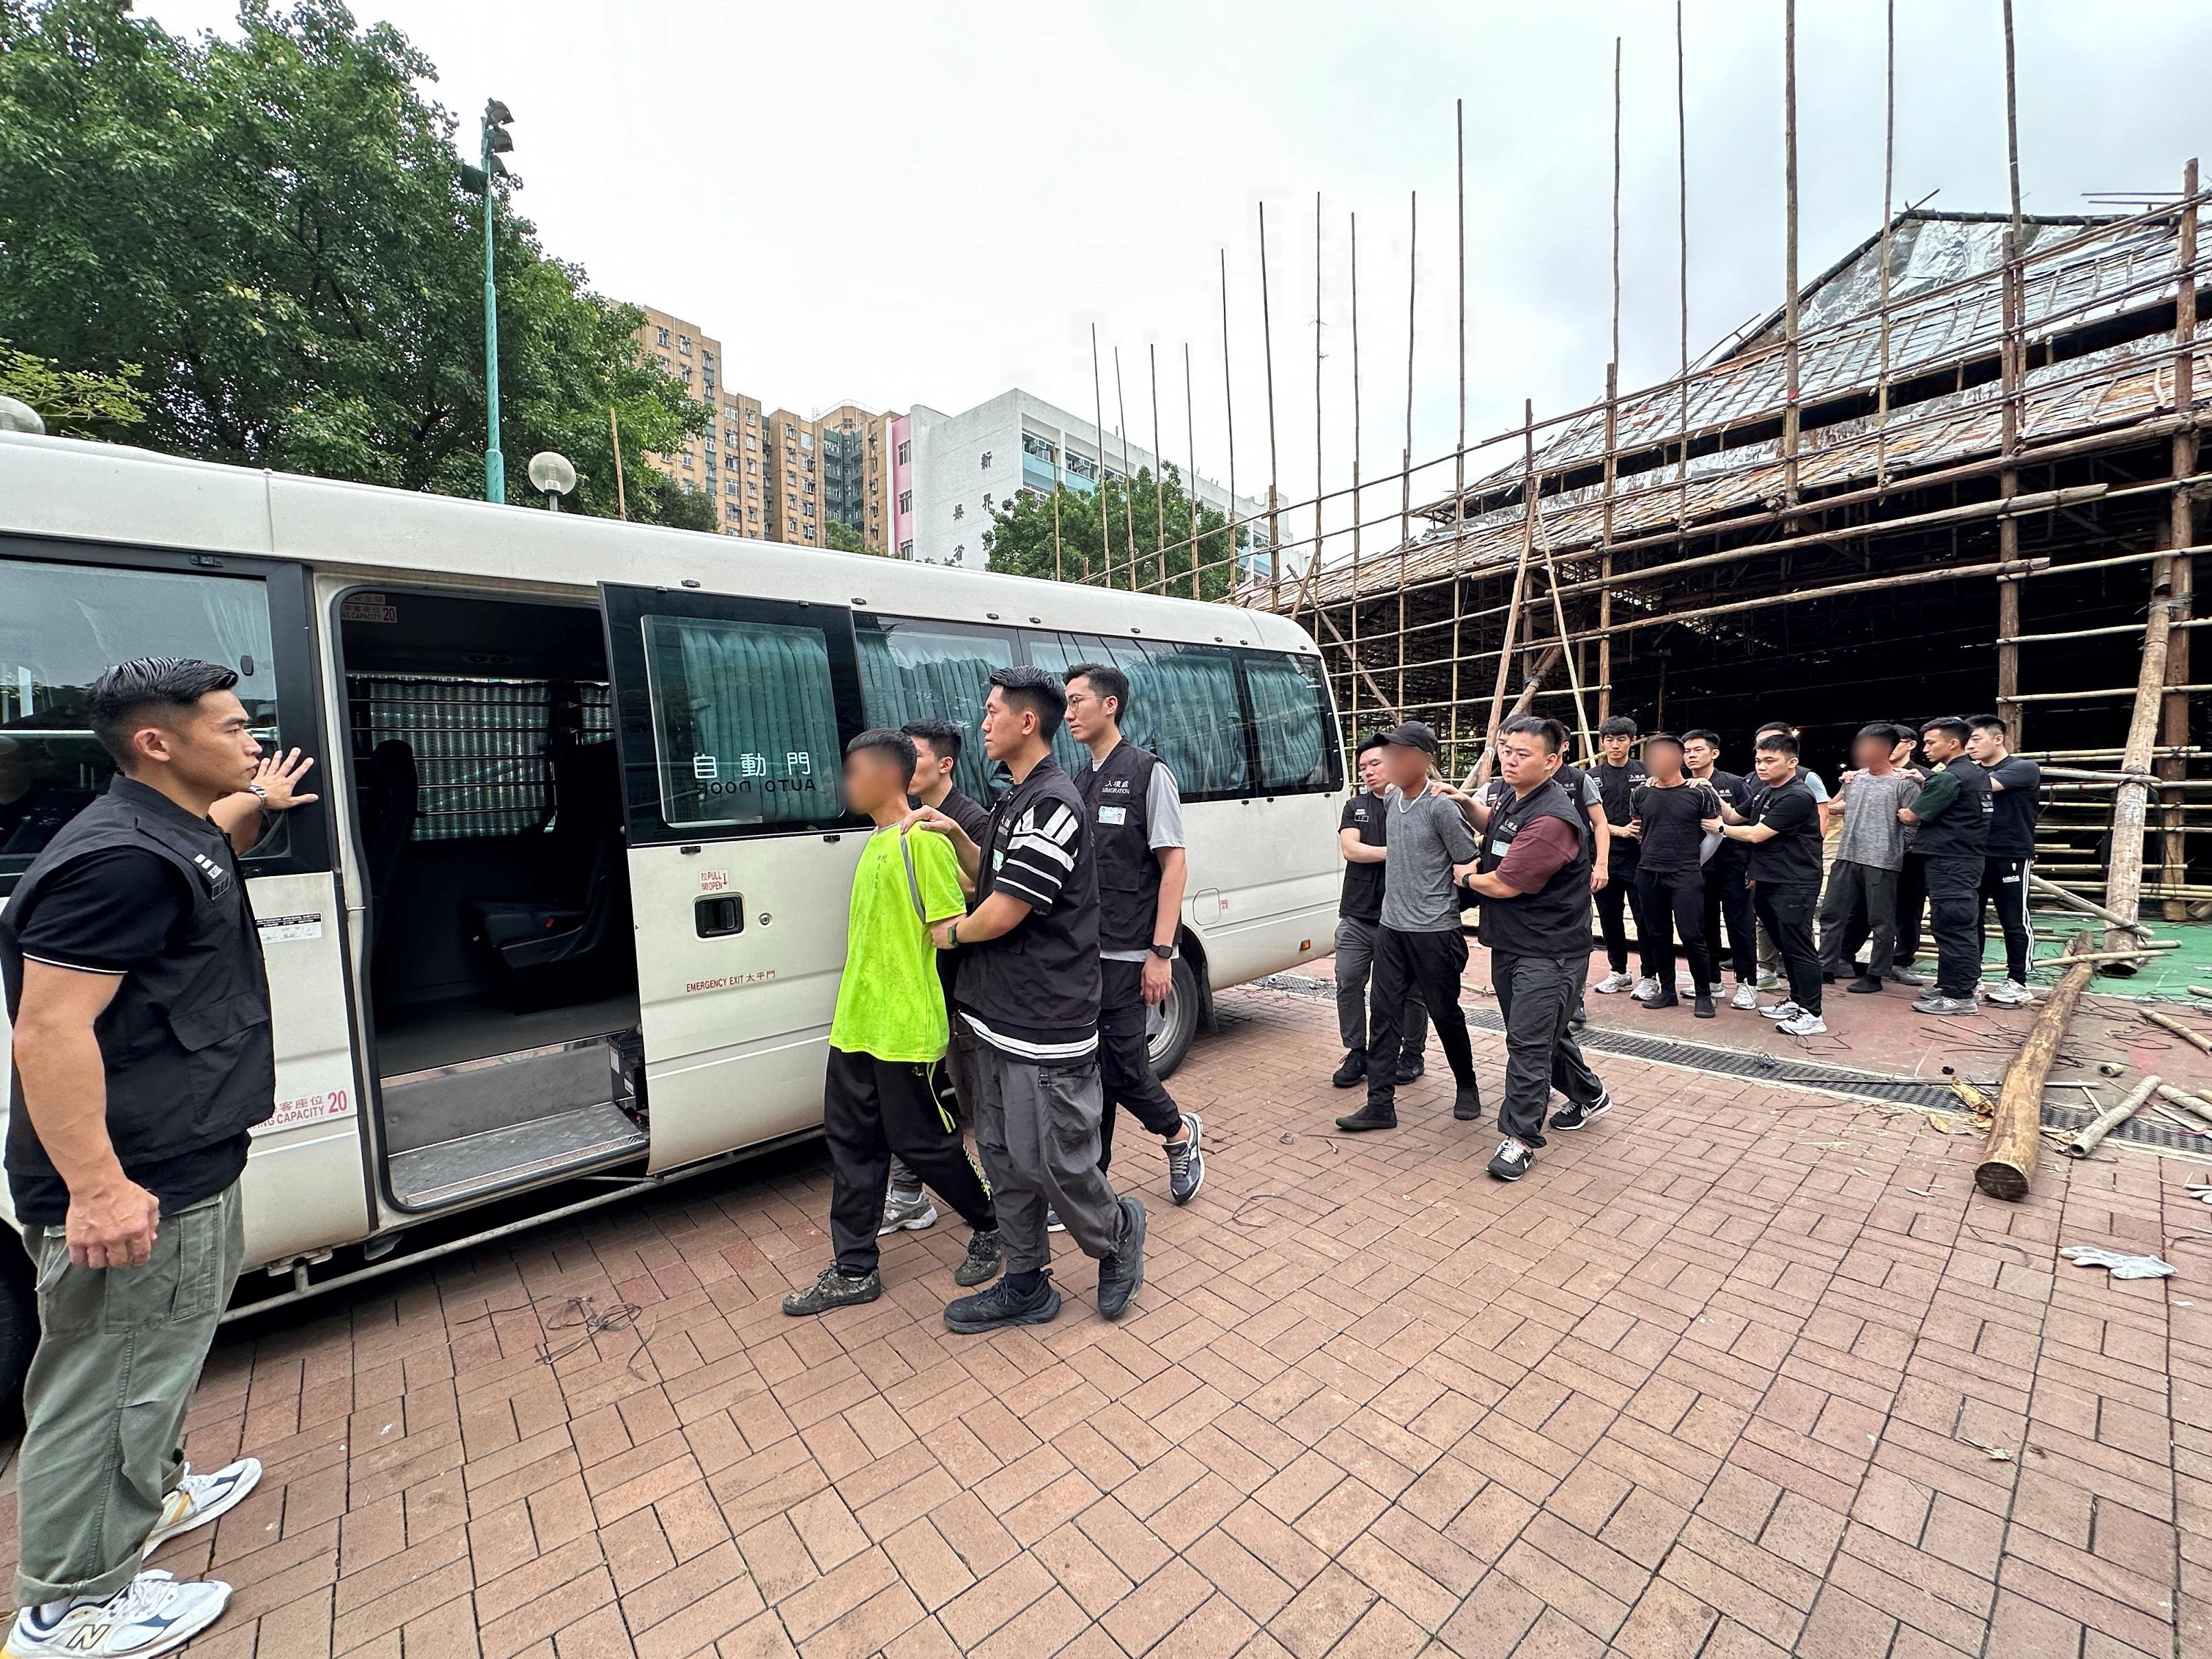 The Immigration Department mounted a series of territory-wide anti-illegal worker operations codenamed "Contribute", "Greenlane", "Lightshadow" and "Twilight", and joint operations with the Hong Kong Police Force codenamed "Windsand", for four consecutive days from June 3 to yesterday (June 6). Photo shows suspected illegal workers arrested during an operation.